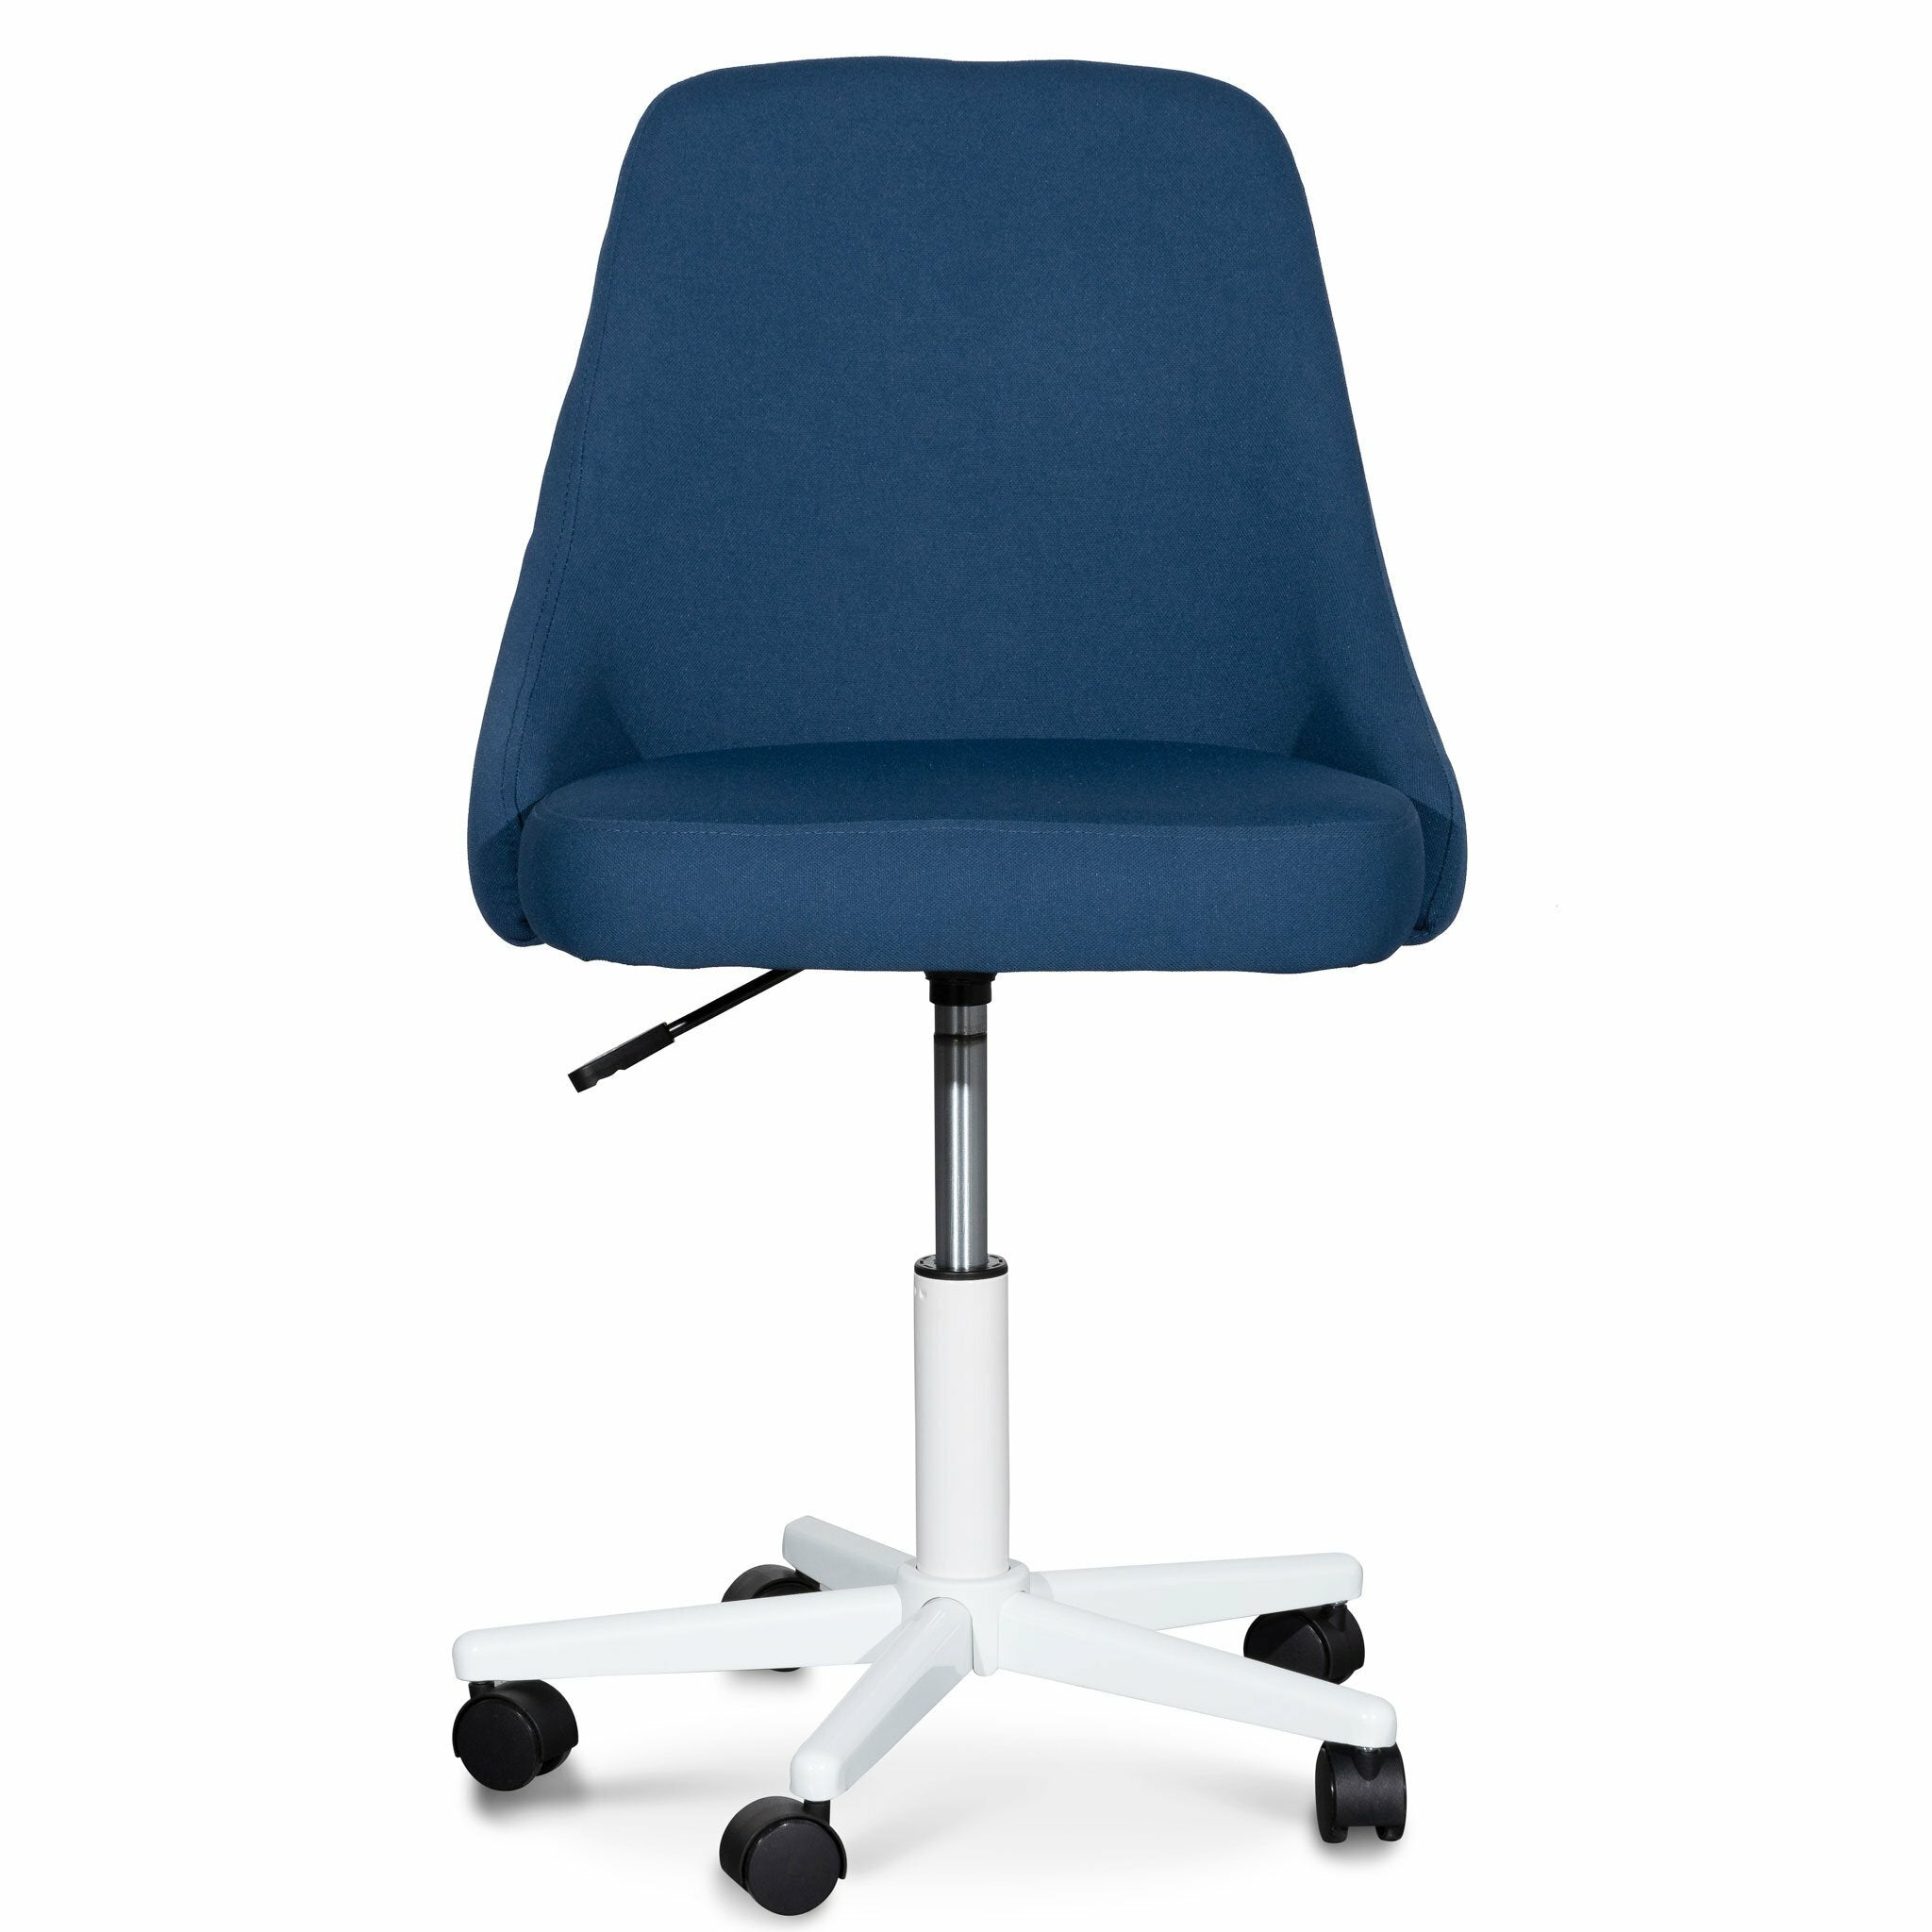 Ernesto Space Blue Fabric Office Chair - White Base